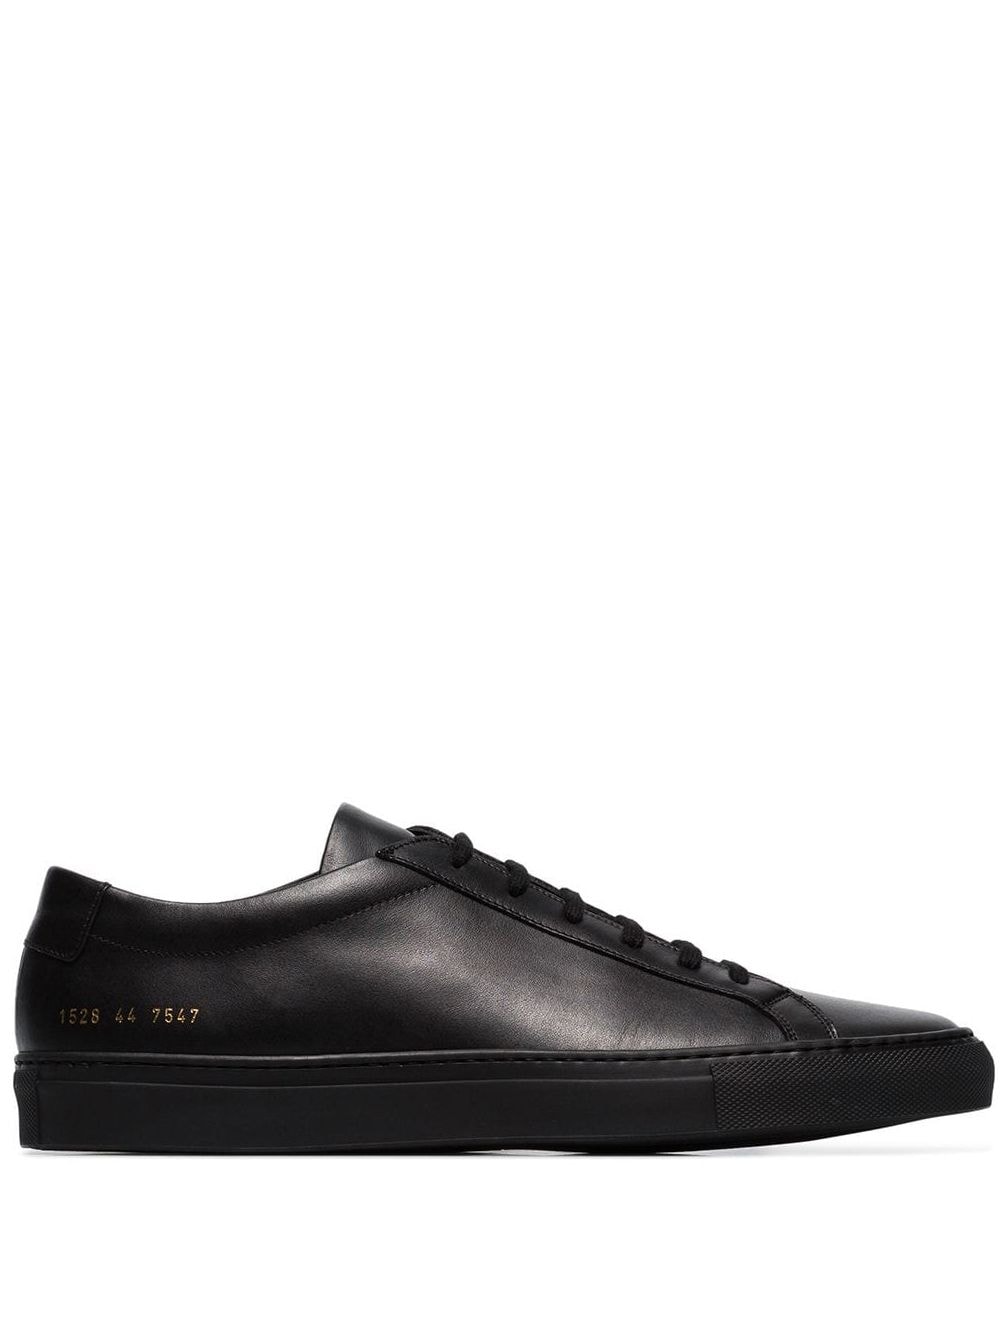 common projects black leather